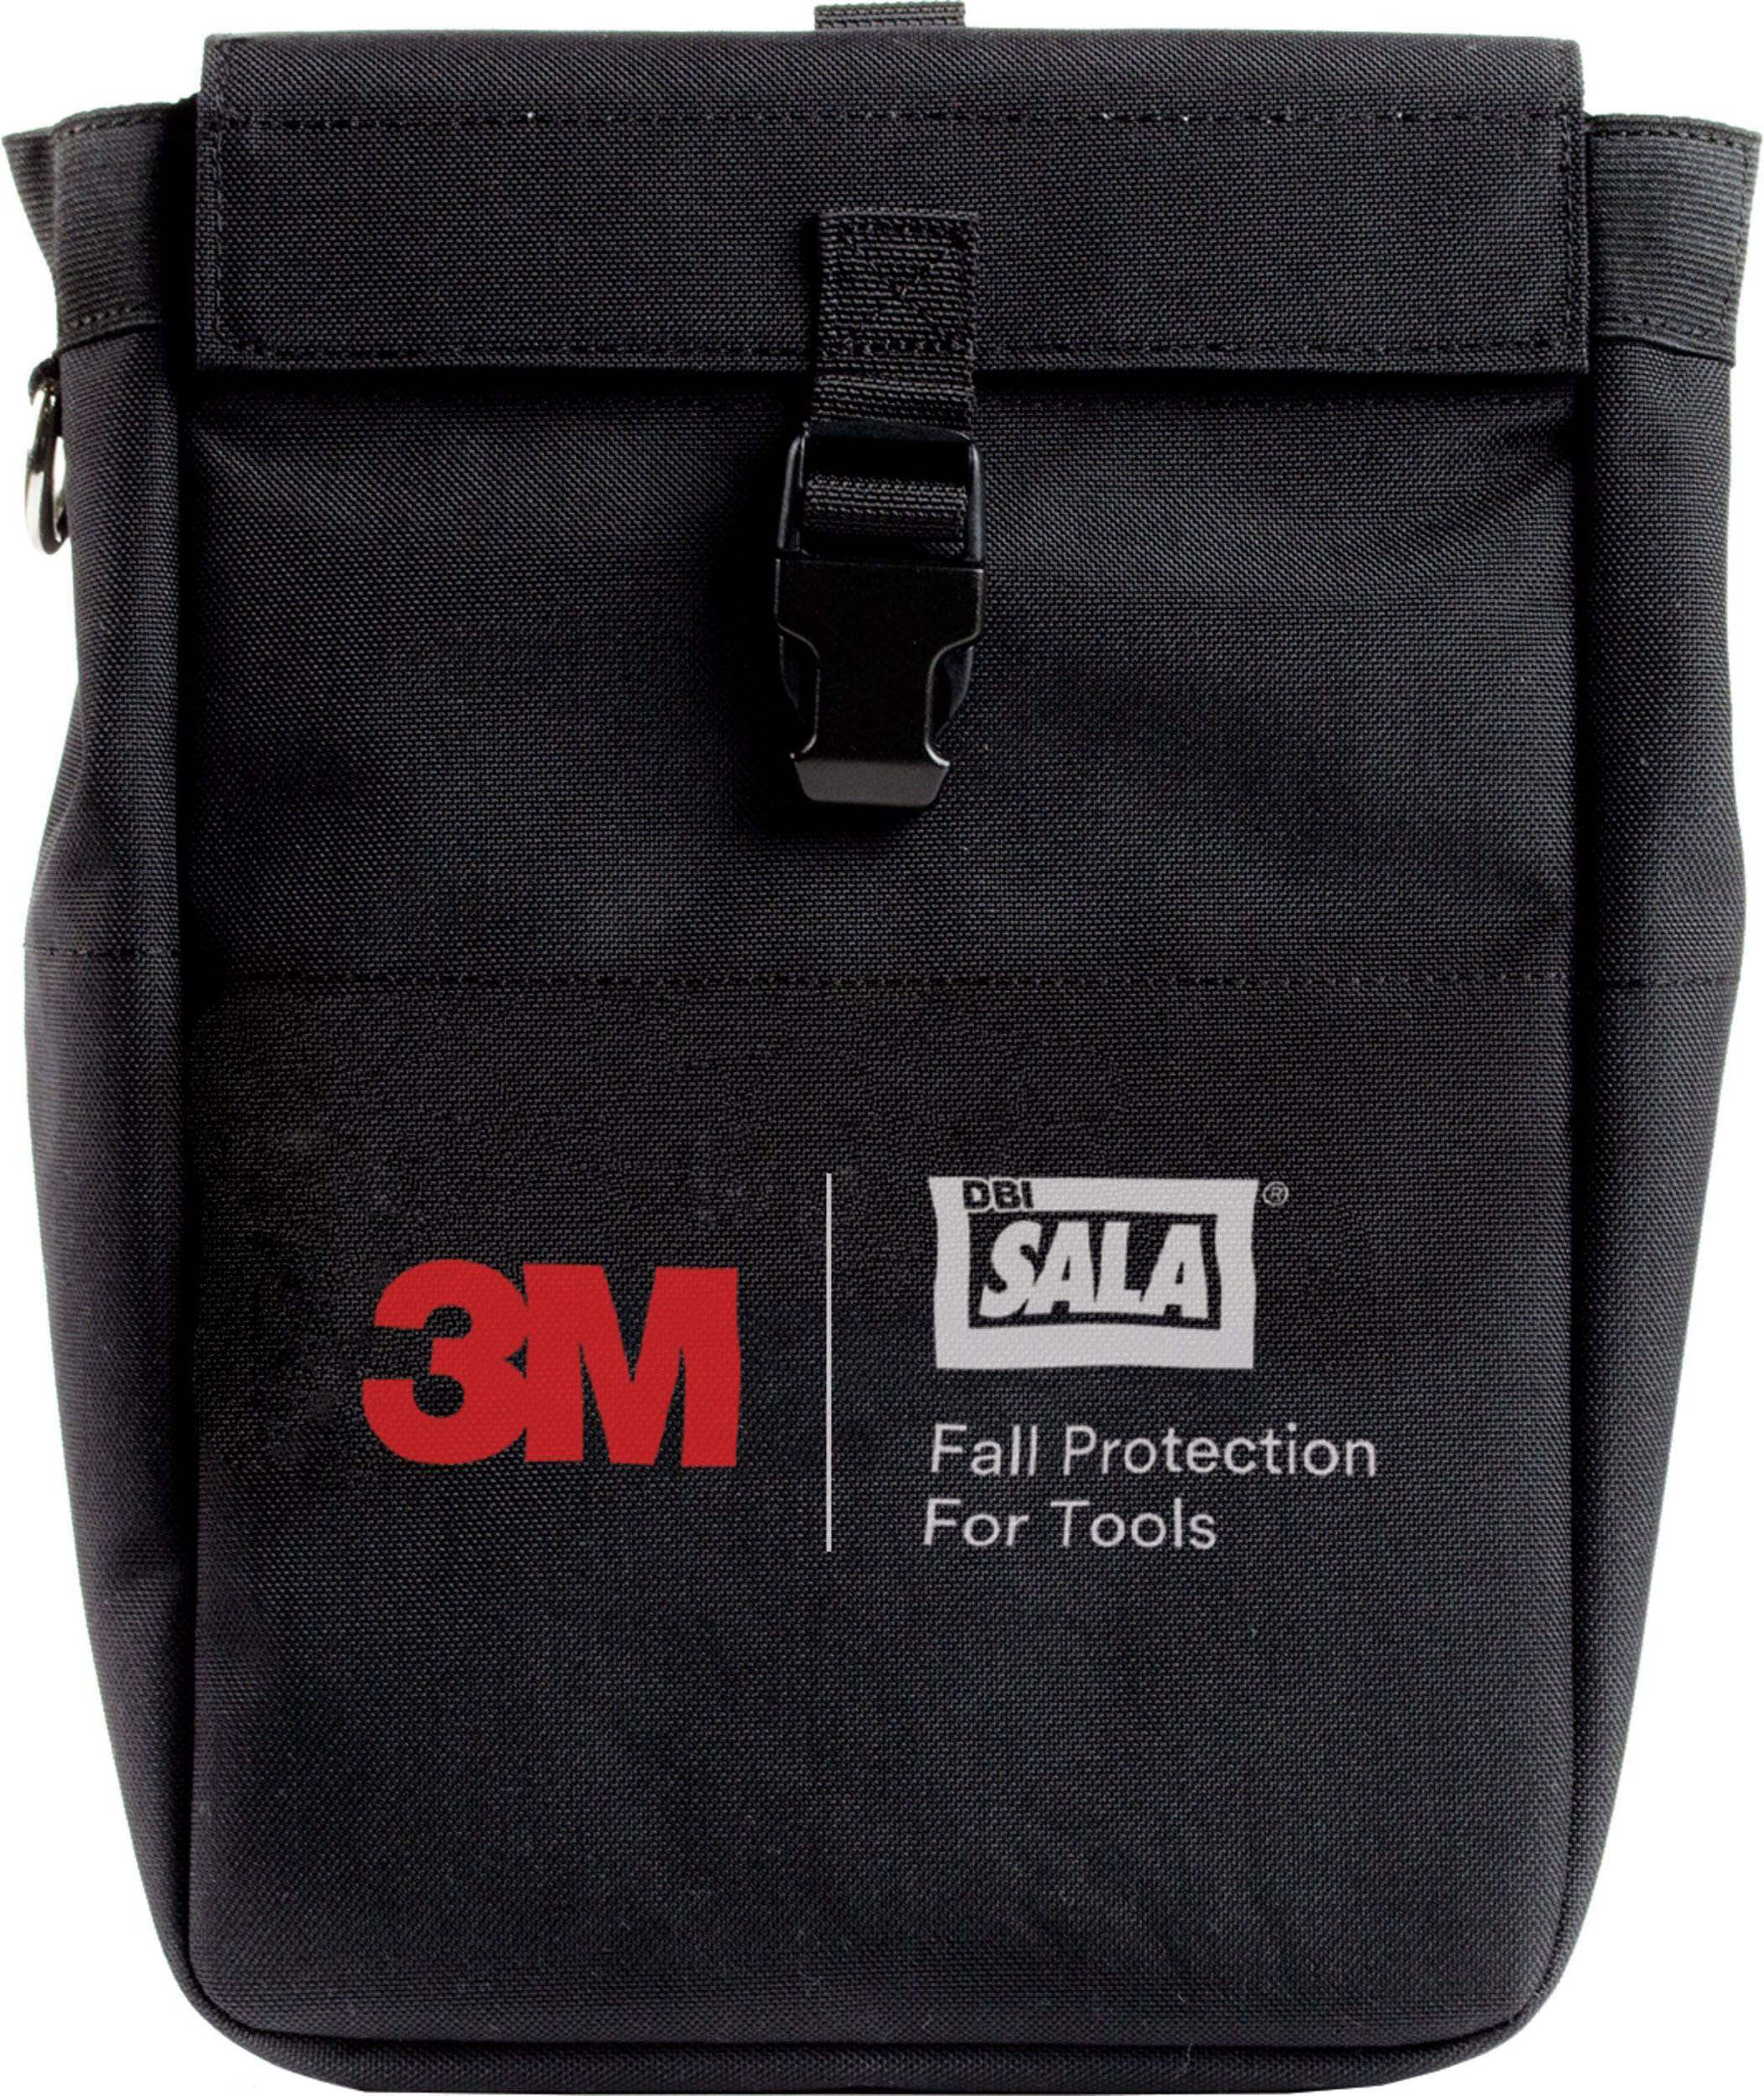 3M DBI SALA Extra Deep Tool Pouch with D Ring & Two Retractors 1500128 - SecureHeights